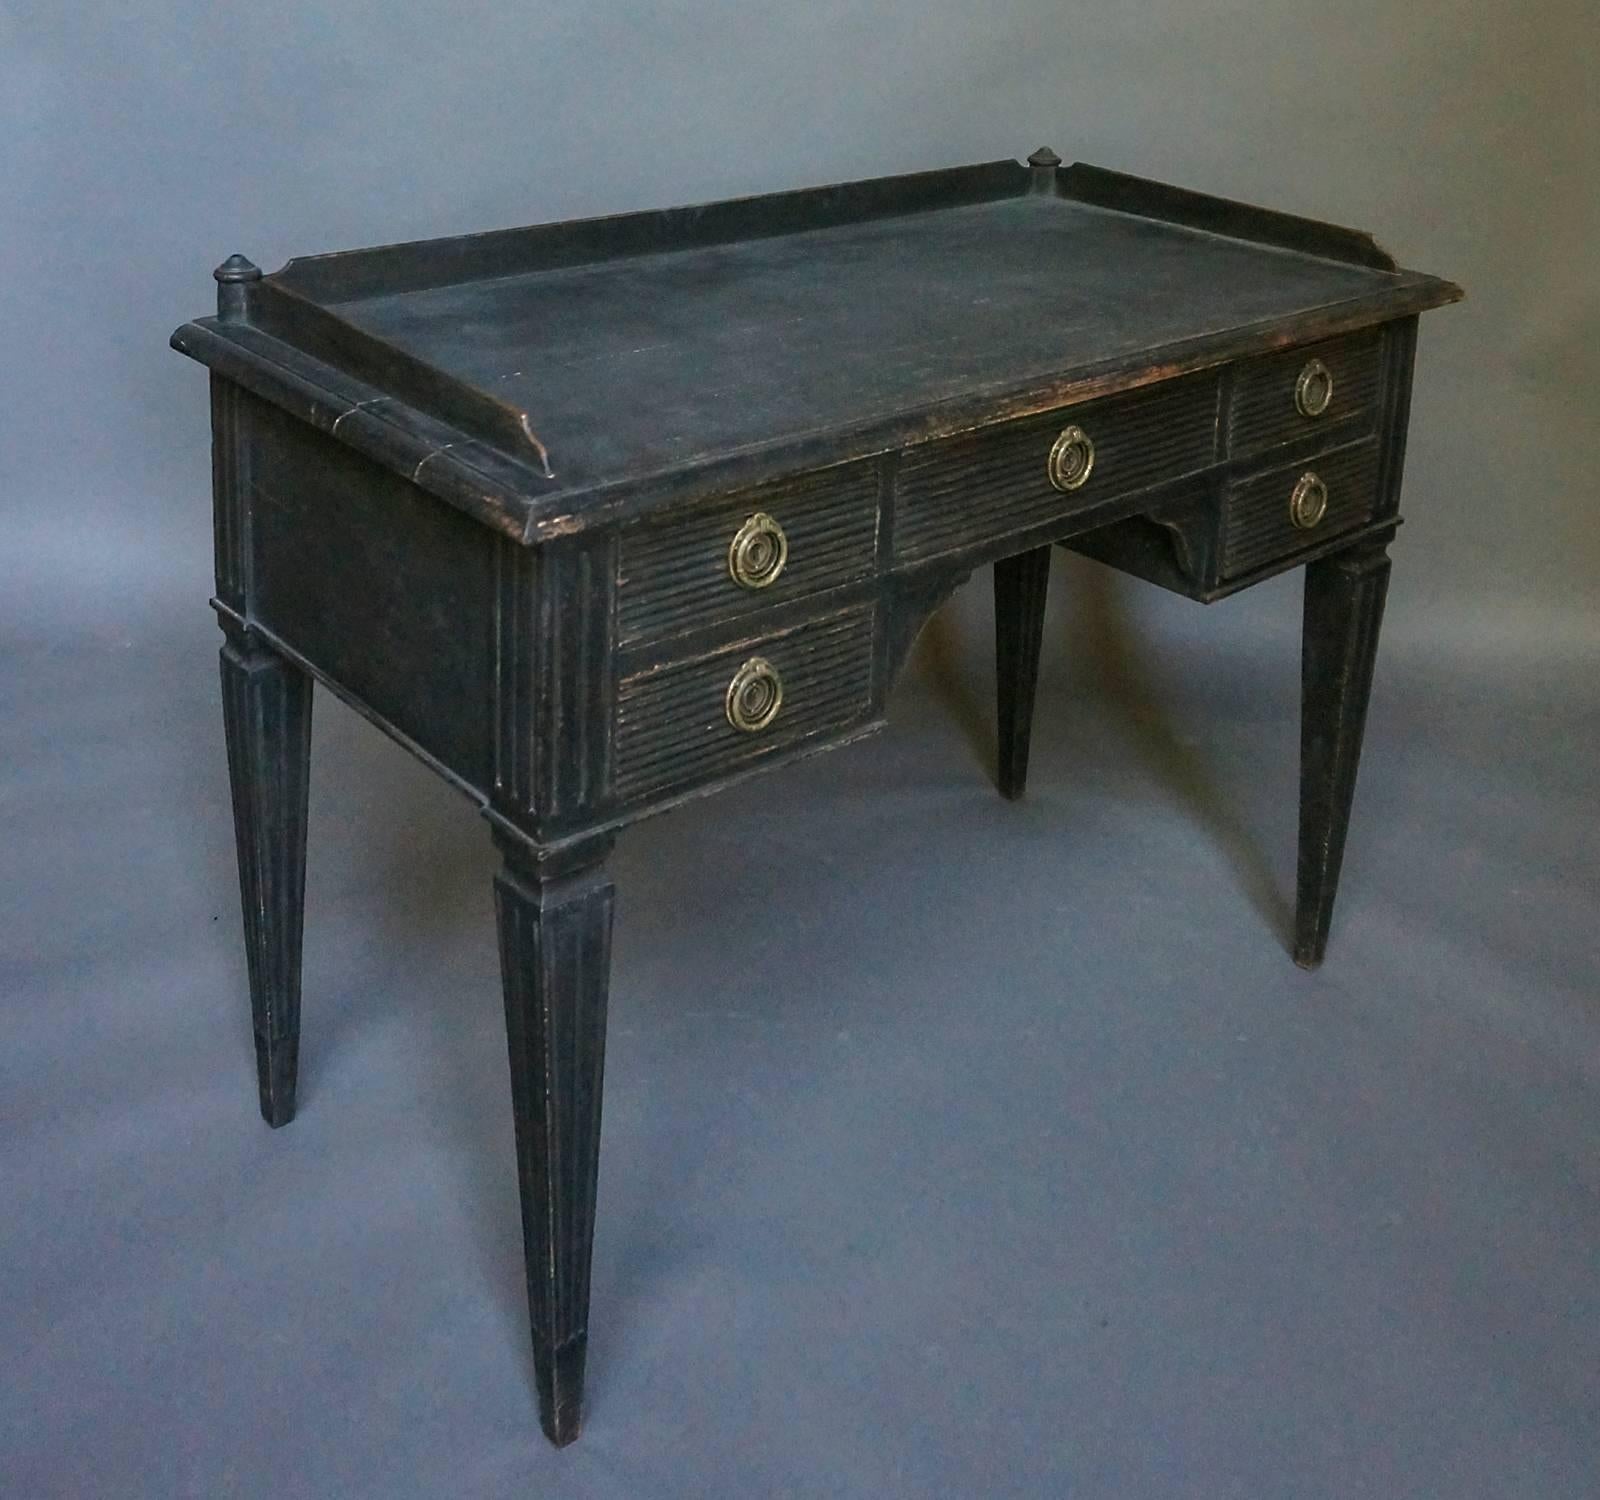 Black painted knee hole writing desk, Sweden, circa 1860. The top has a gallery edge with turned posts at the back corners as a decorative flourish. The five drawers have horizontal reeding, as do the tapering square legs. Quite a nice look to this